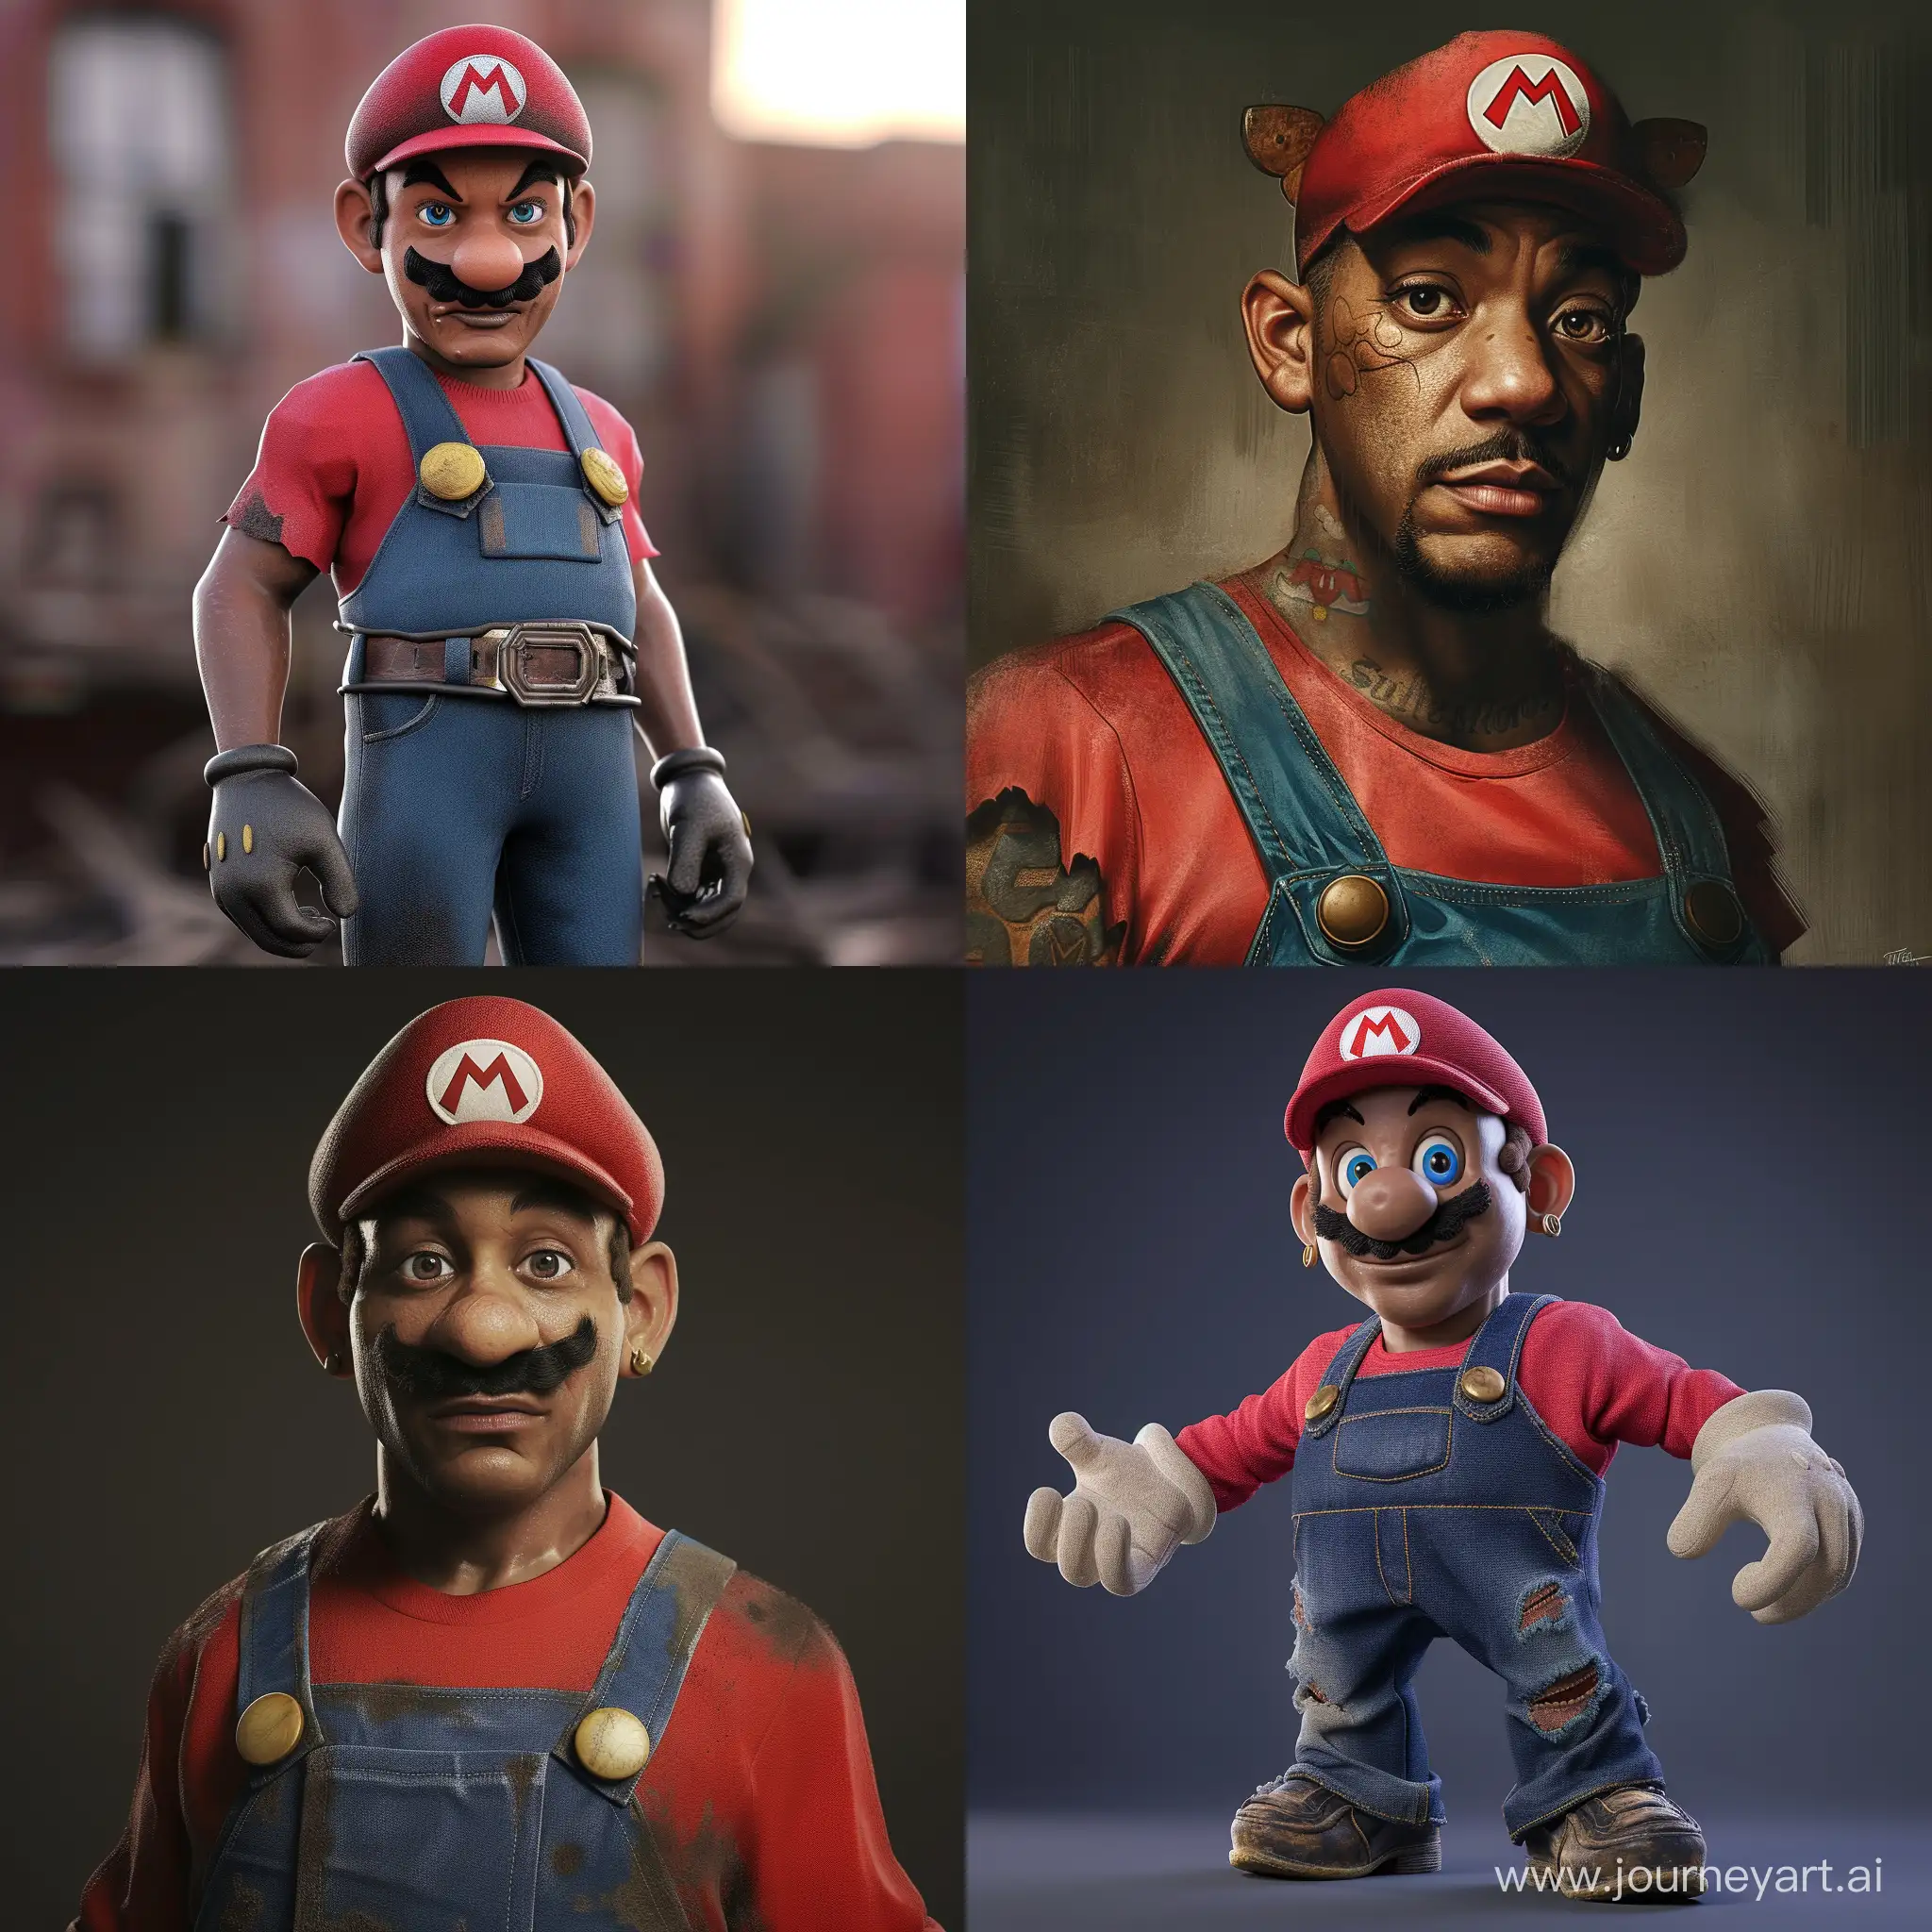 Realistic-Will-Smith-as-Super-Mario-Character-Art